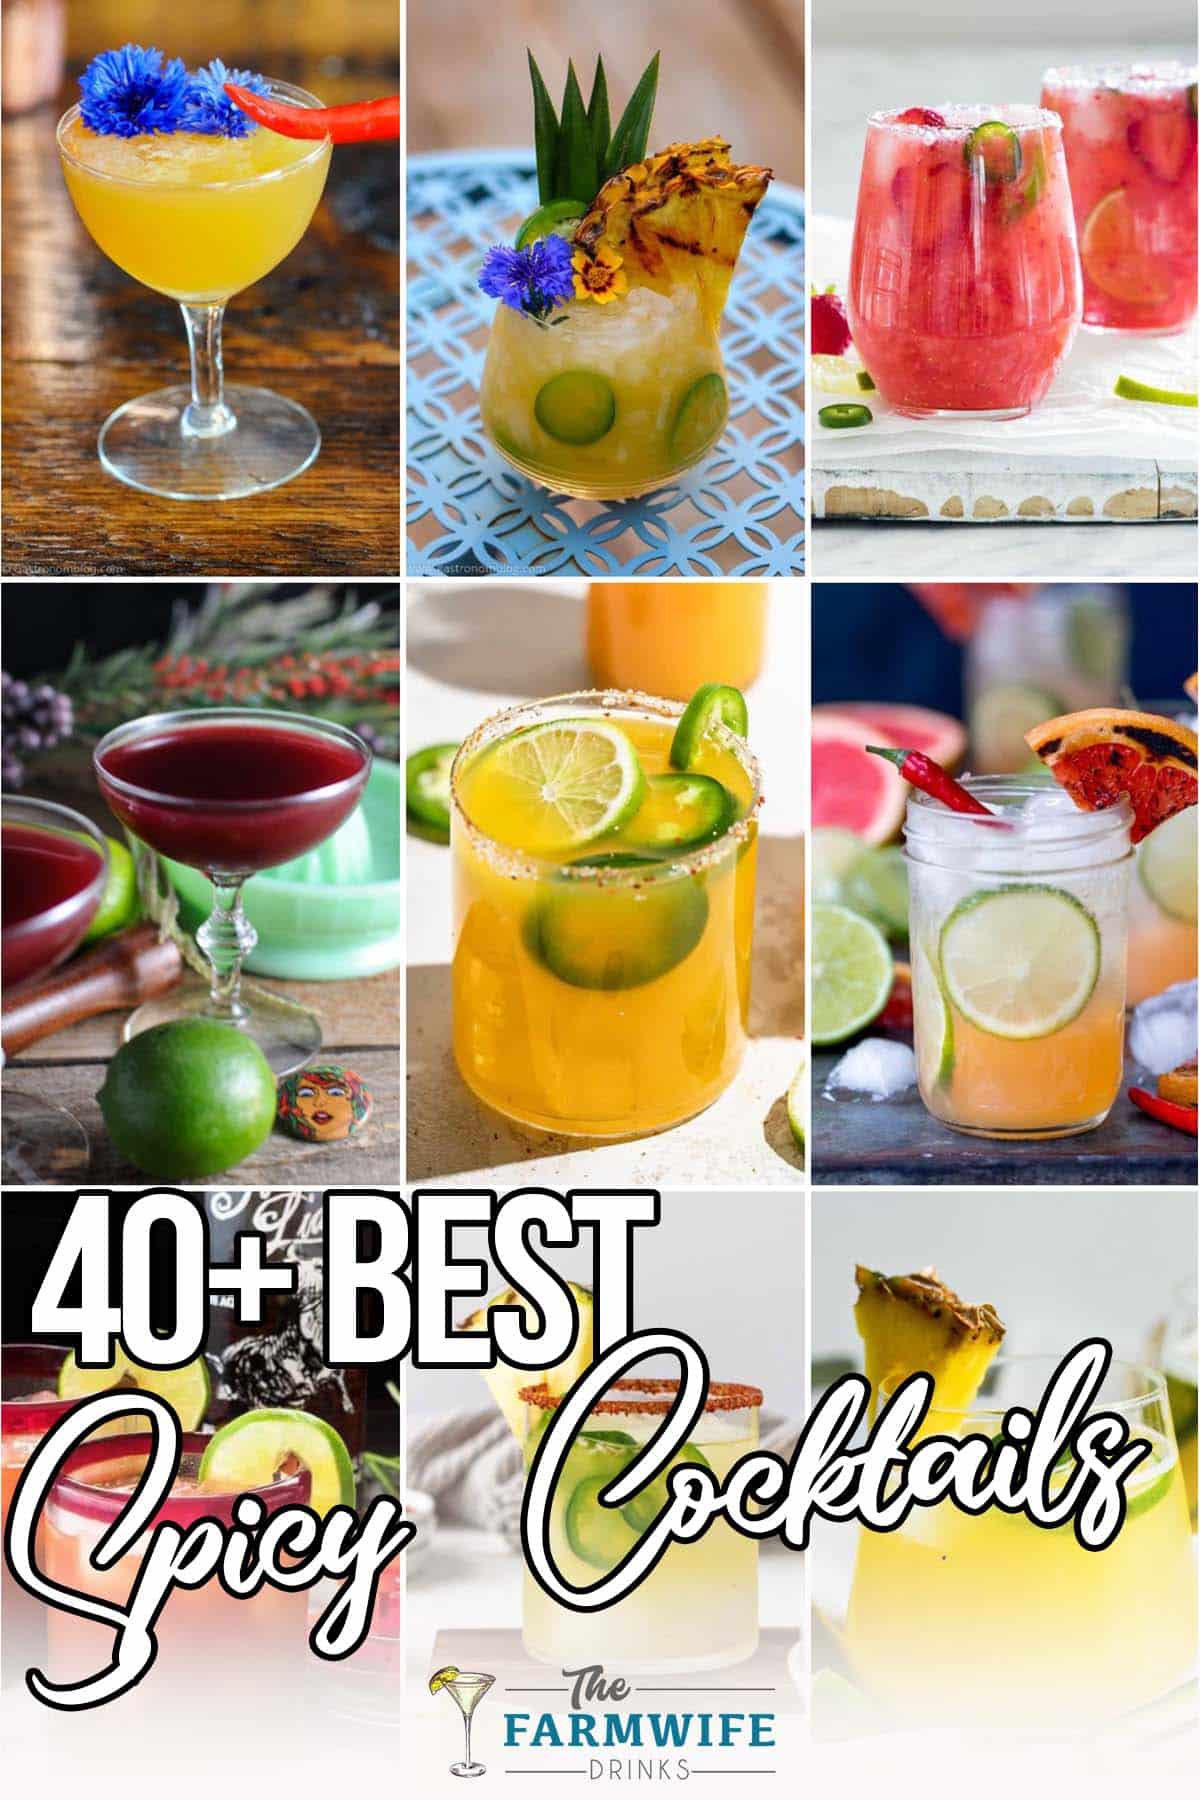 photo collage of spicy cocktails and drinks with text which reads 40+ best spicy cocktails